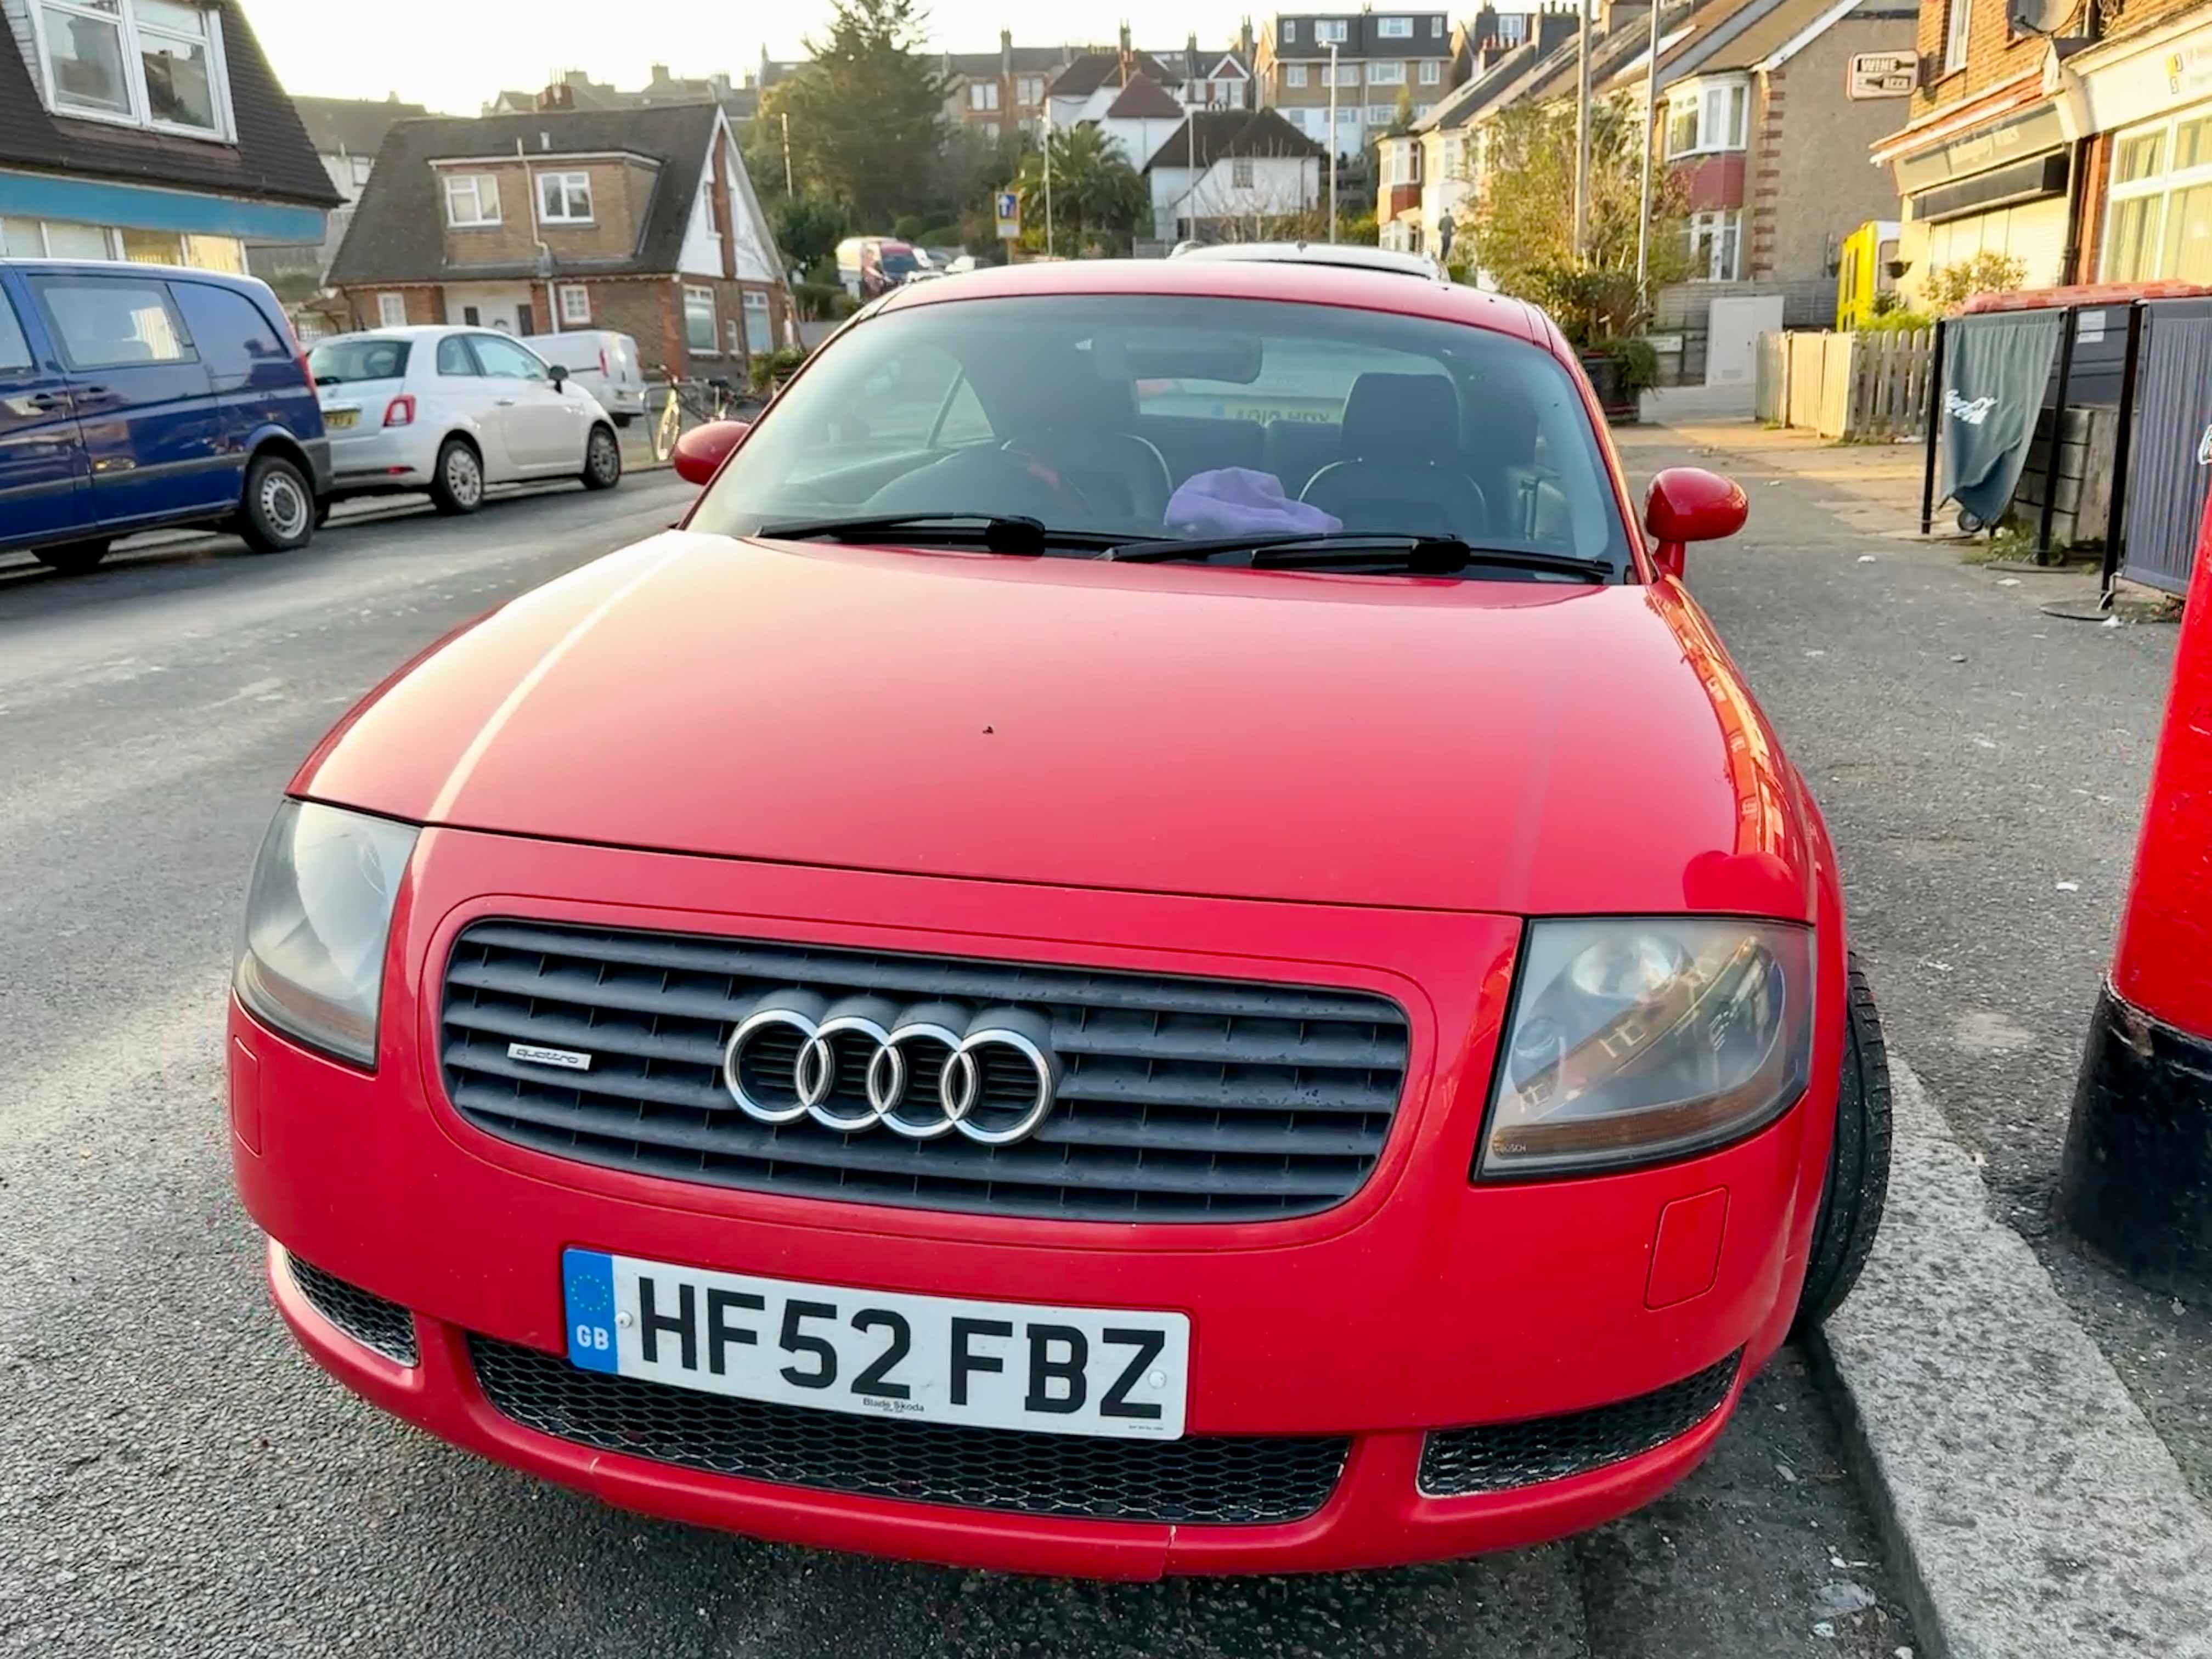 Photograph of HF52 FBZ - a Red Audi TT parked in Hollingdean by a non-resident, and potentially abandoned. The second of two photographs supplied by the residents of Hollingdean.